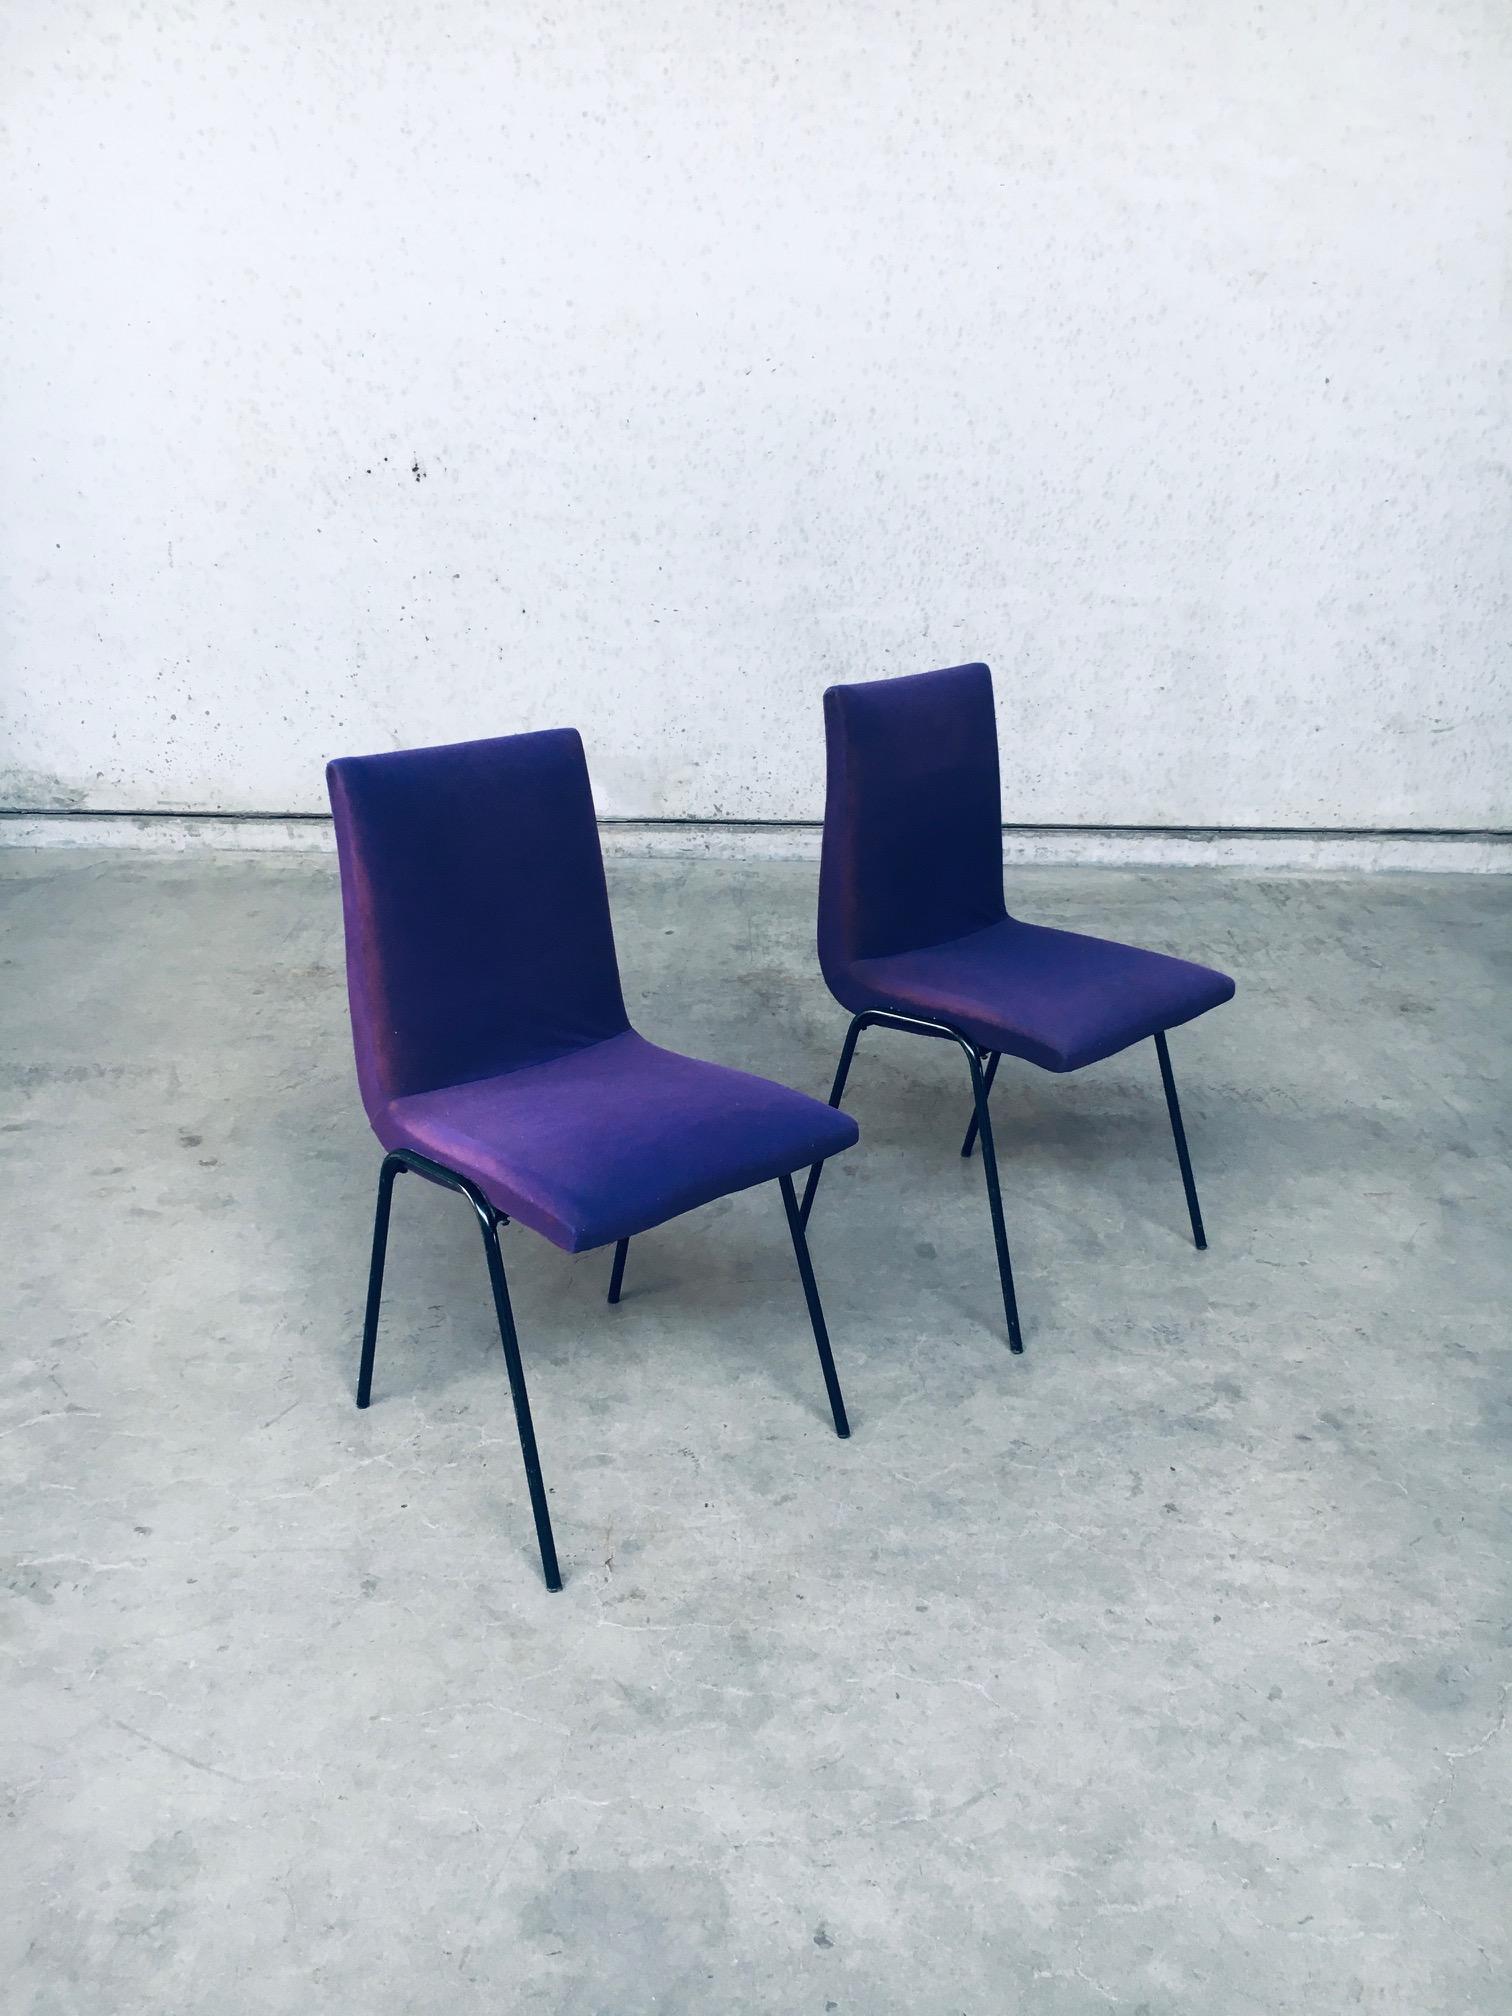 Mid-20th Century Mid-Century Modern Design Robin Chair Set by Pierre Guariche for Meurop, 1950's For Sale